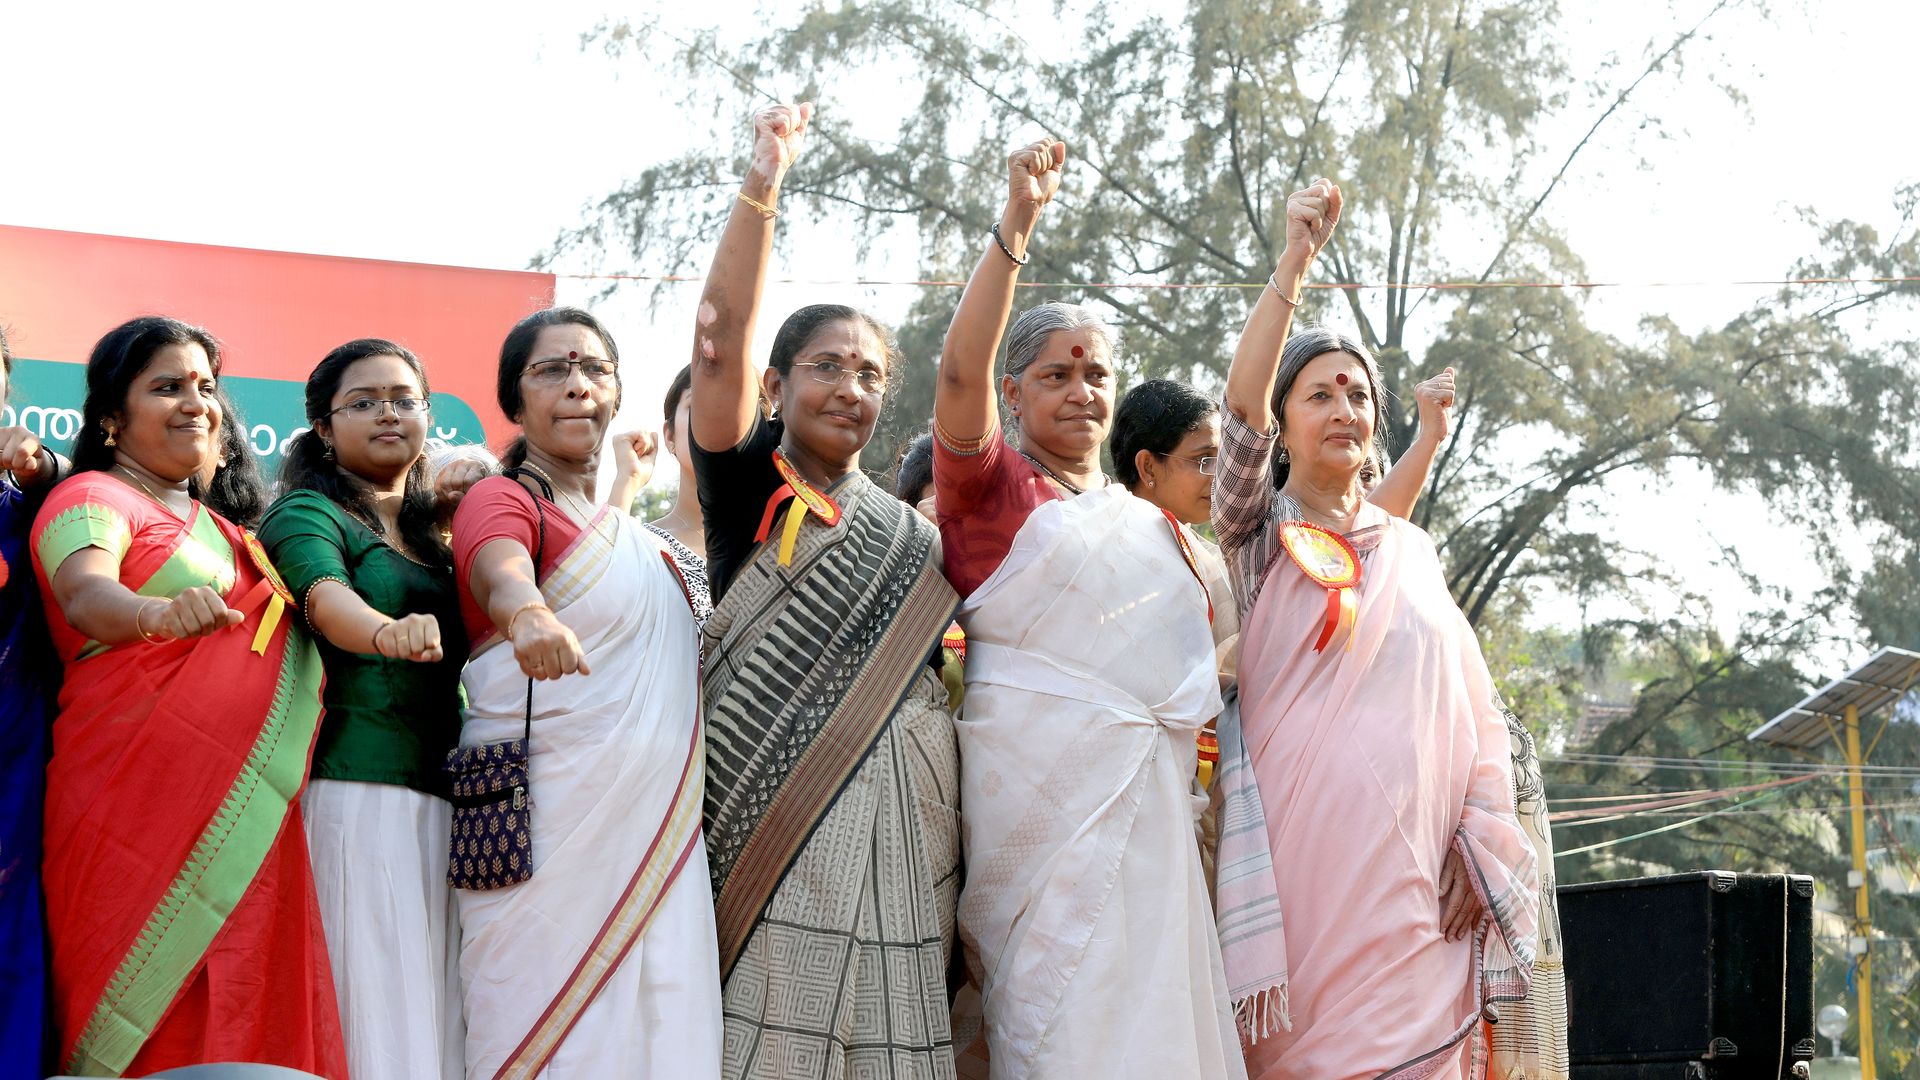 Women take oath as they gather to participate in the 620 km-long 'Women's Wall' against communalism and gender discrimination